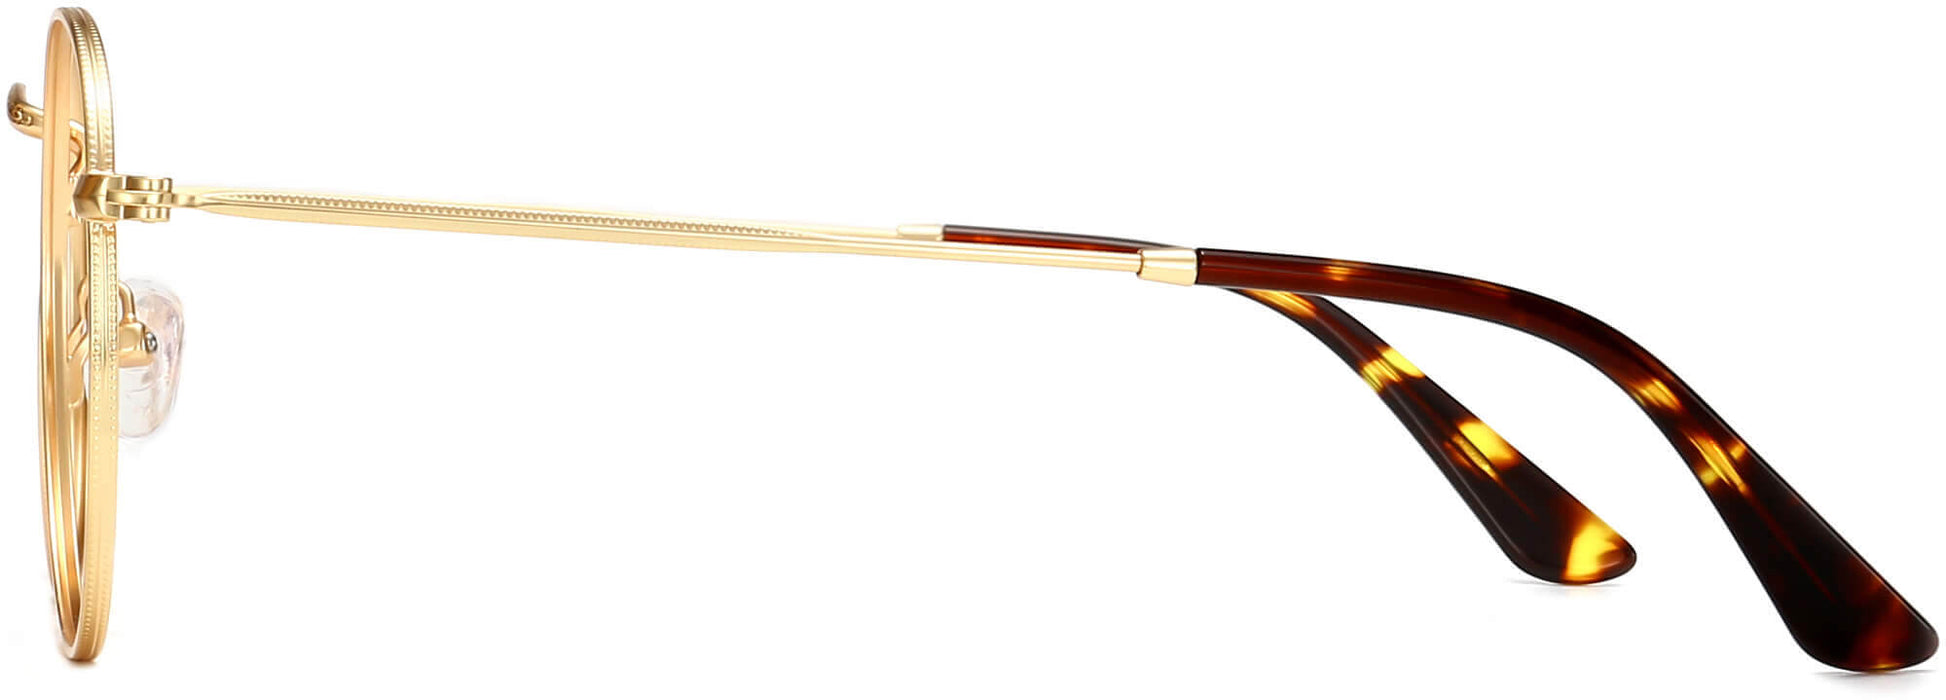 Dominic Round Gold Eyeglasses from ANRRI, side view